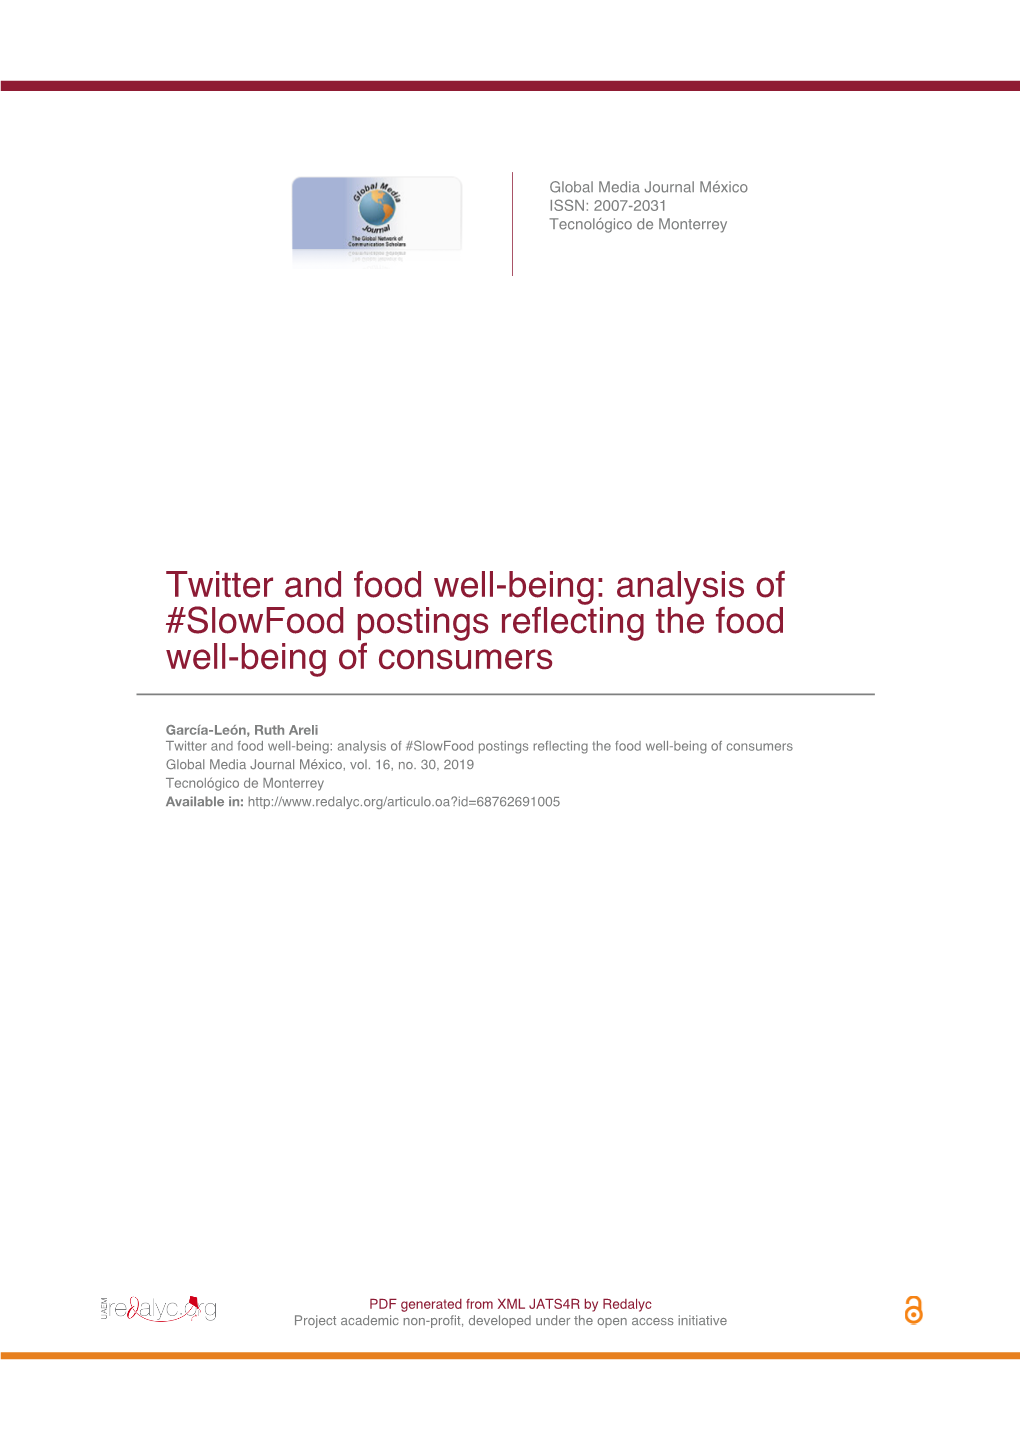 Twitter and Food Well-Being: Analysis of #Slowfood Postings Reflecting the Food Well-Being of Consumers